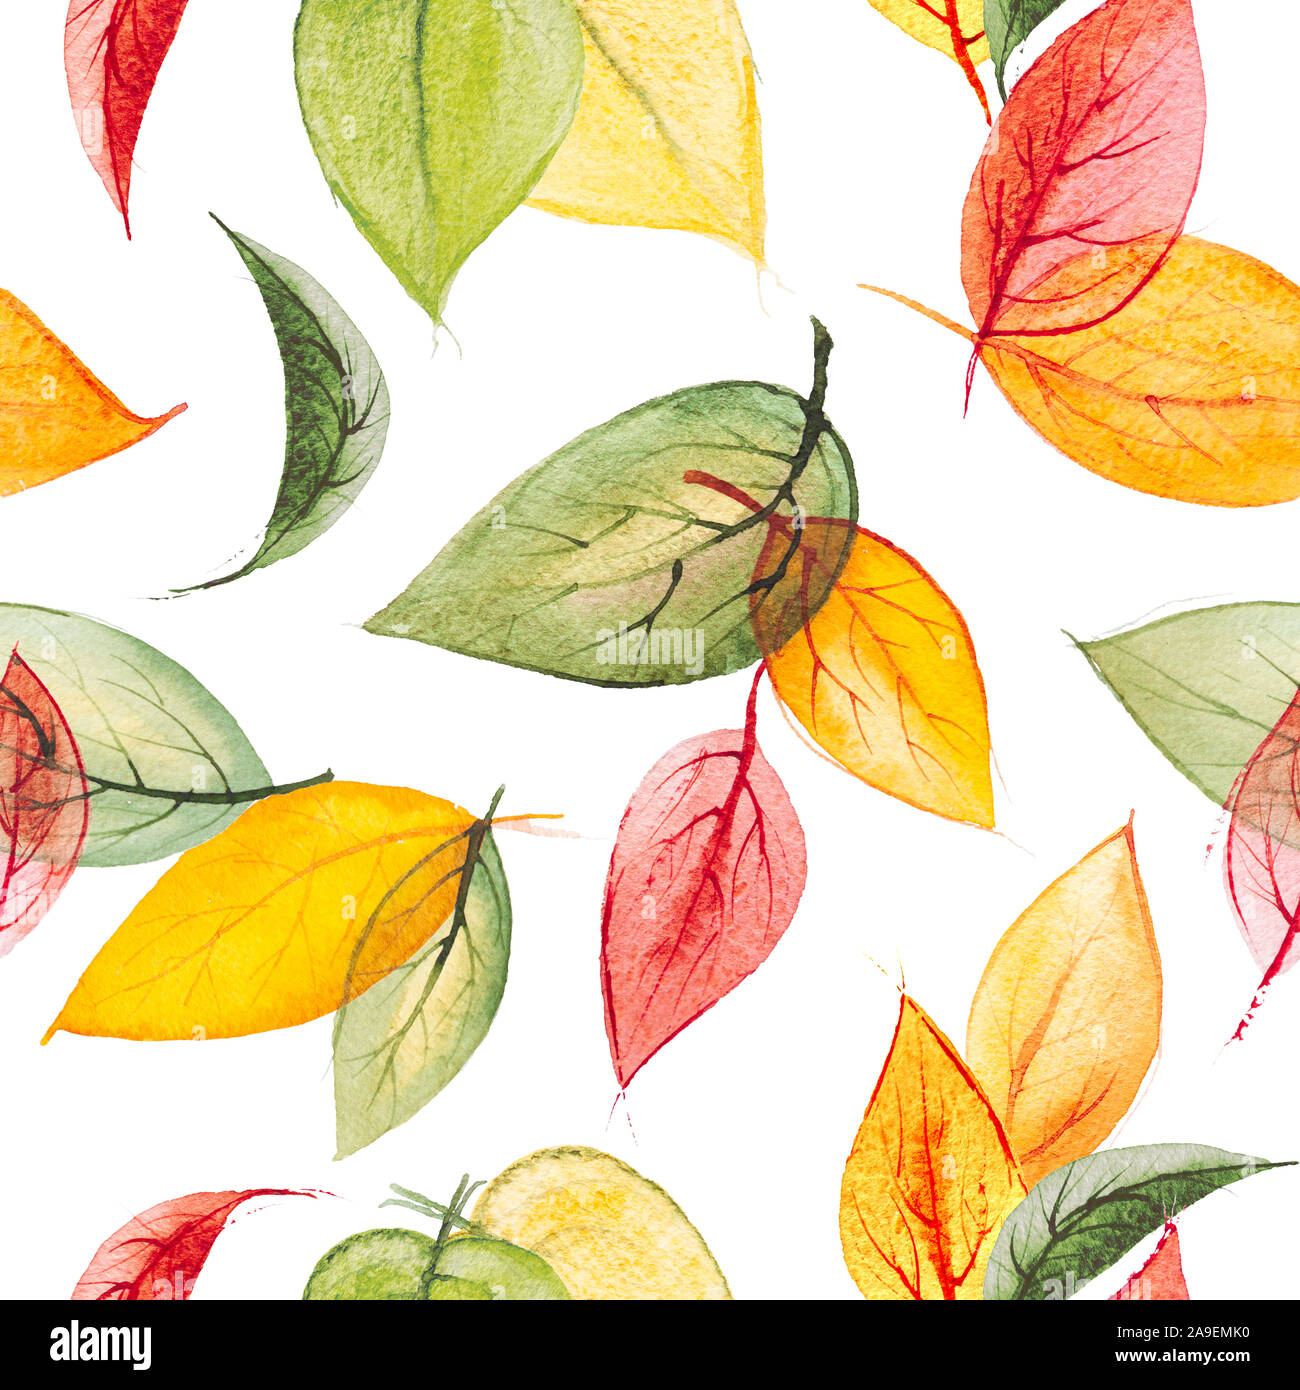 Watercolor sesamles print with autumn leaves Stock Photo